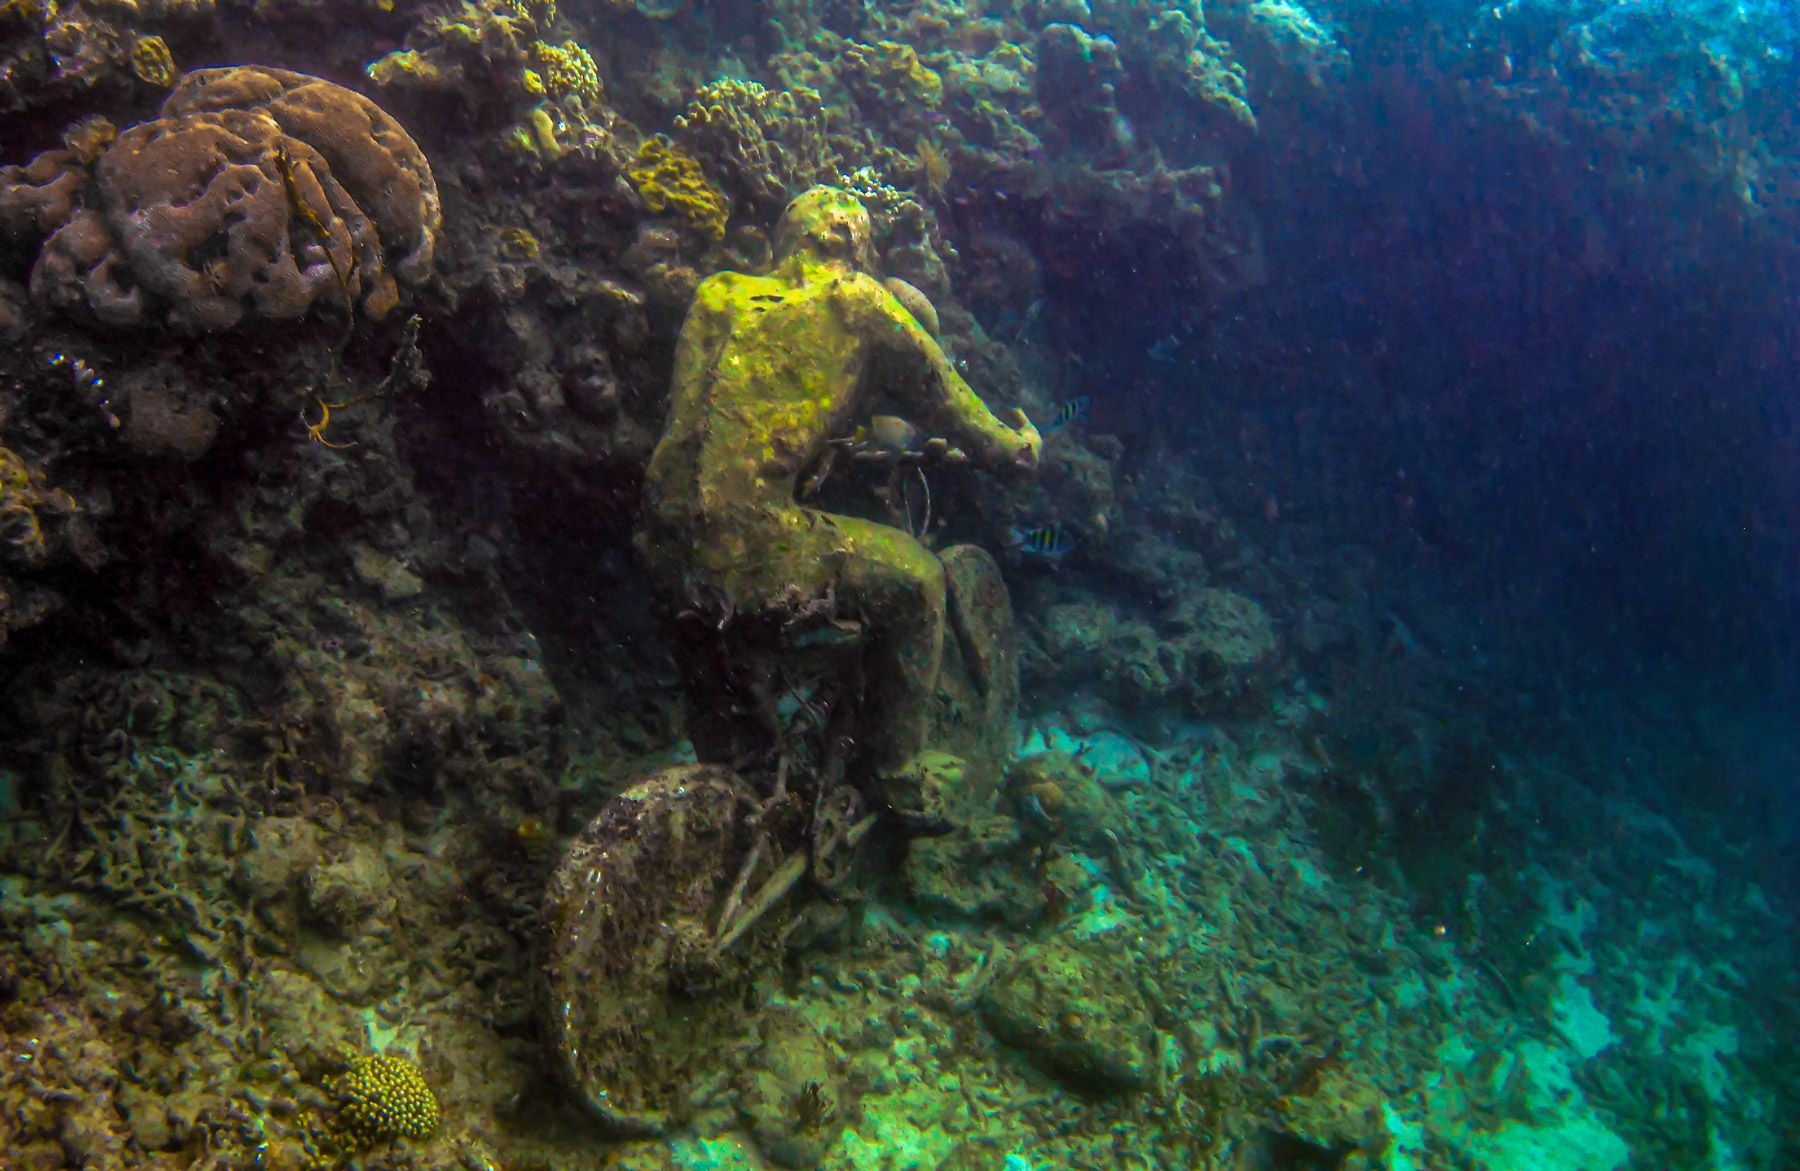 Underwater sculptures created by Kent artist in the Caribbean